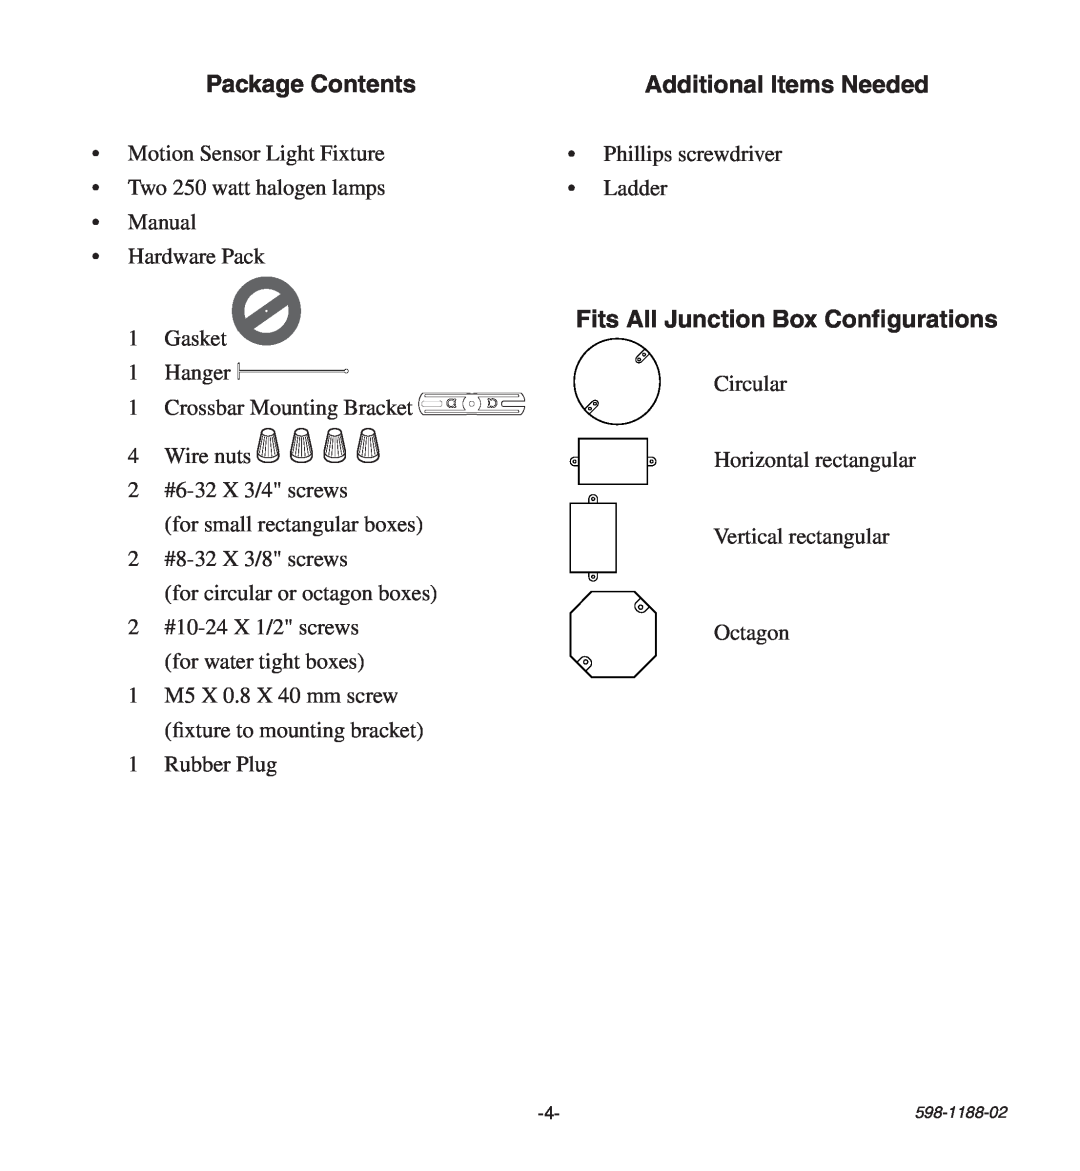 Heath Zenith HD-9260 manual Package Contents, Additional Items Needed, Fits All Junction Box Configurations 